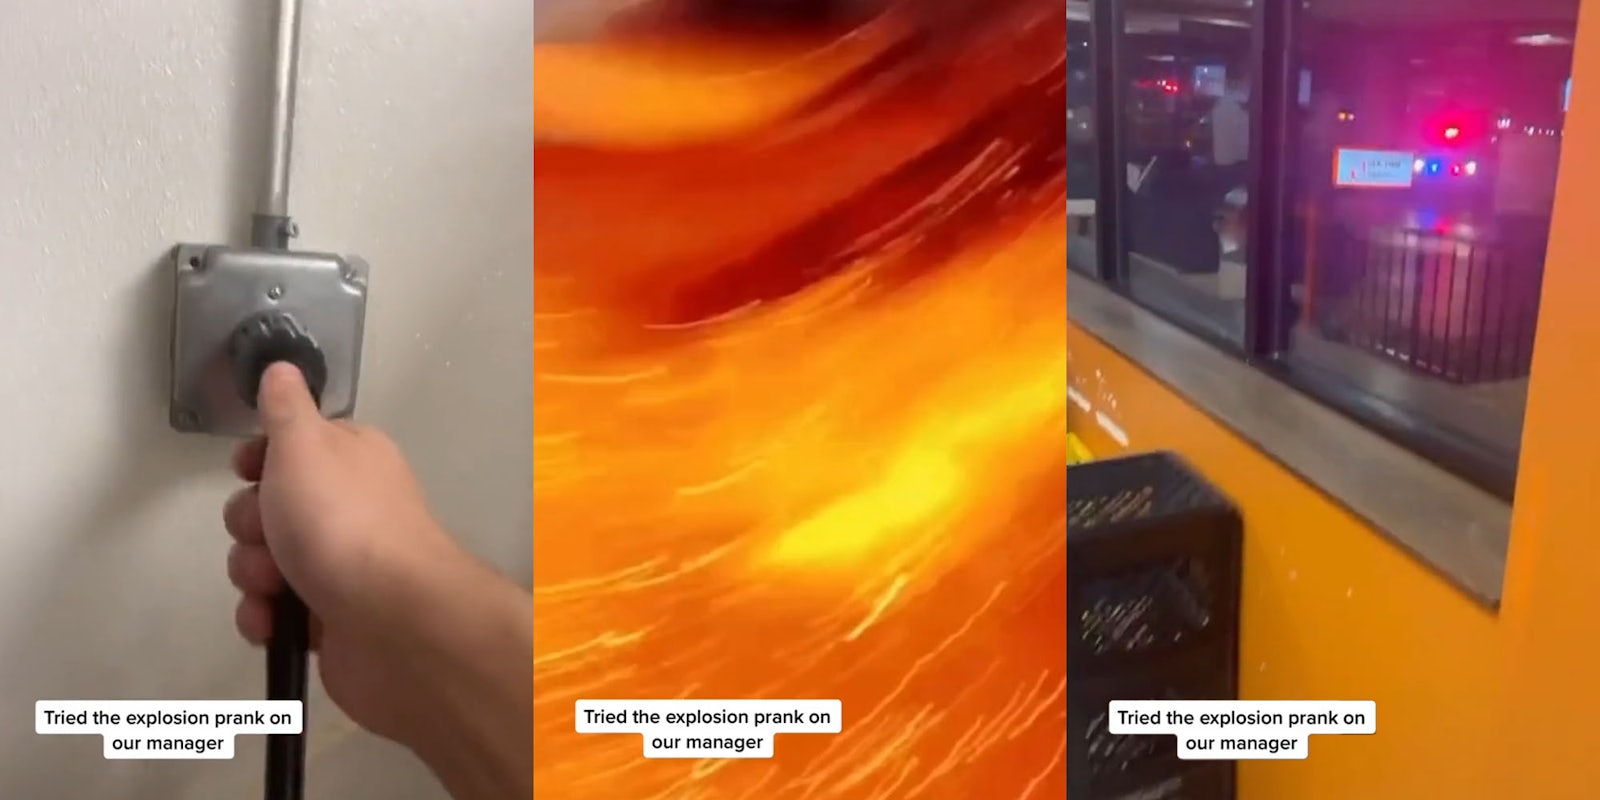 worker hand on cord in wall caption 'Tried the explosion prank on our manager' (l) Fake explosion orange and yellow video with caption 'Tried the explosion prank on our manager' (c) police lights seen through window with caption 'Tried the explosion prank on our manager' (r)